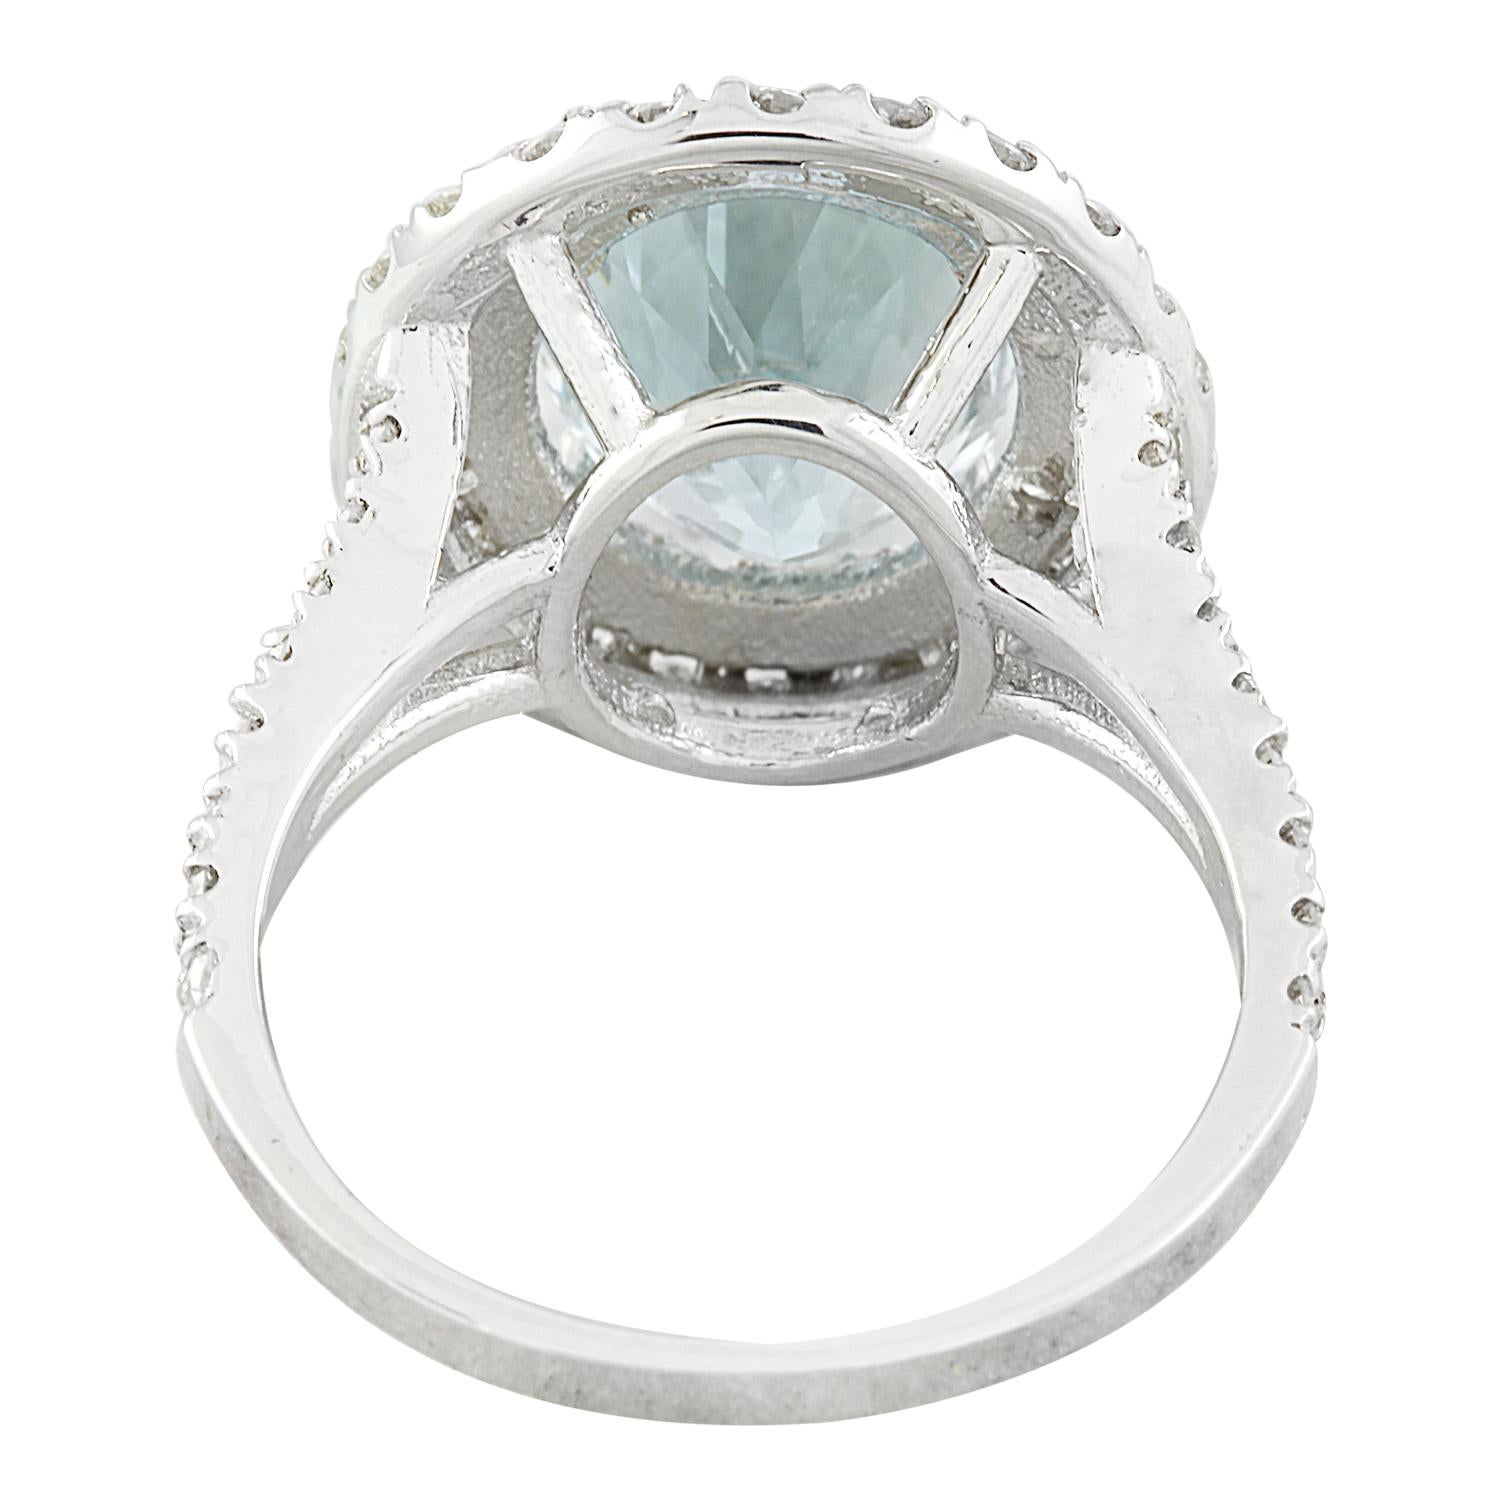 Oval Cut Natural Aquamarine Diamond Ring: Exquisite Beauty in 14K Solid White Gold For Sale